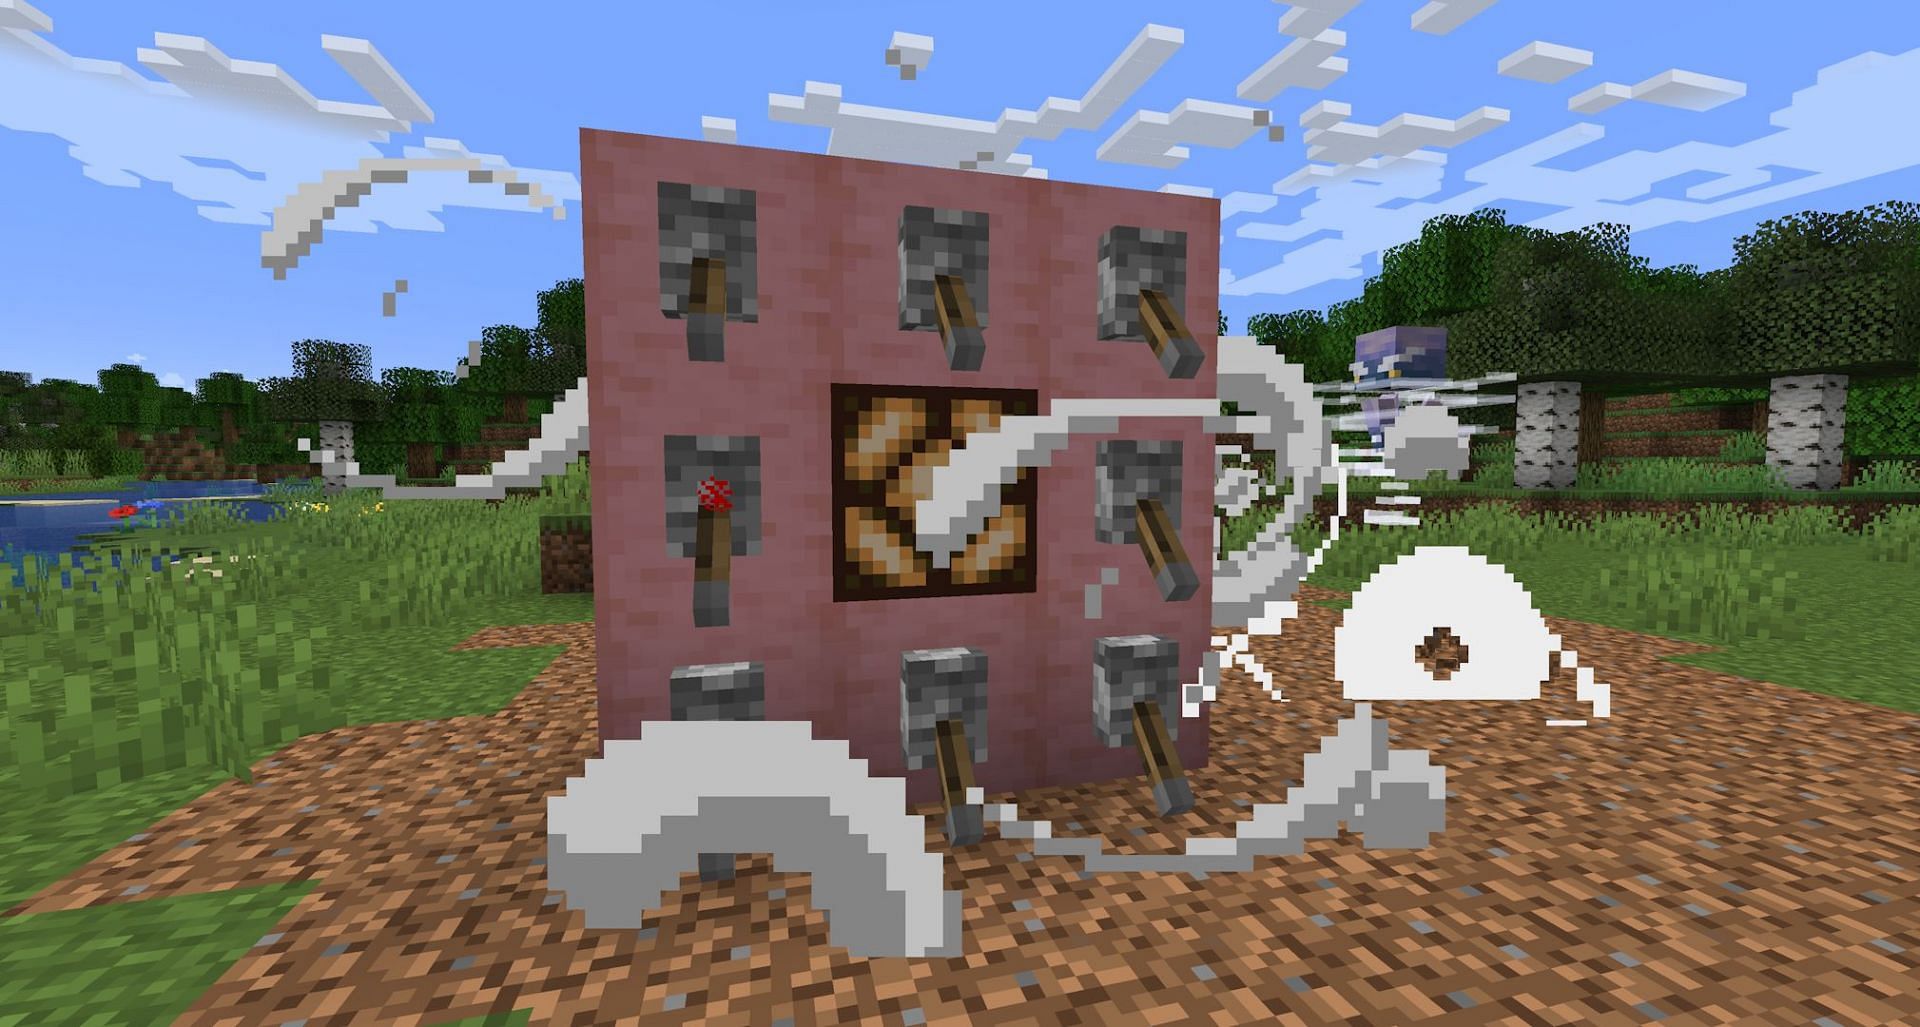 Wind charges are another interesting wireless redstone option. (Image via Mojang)